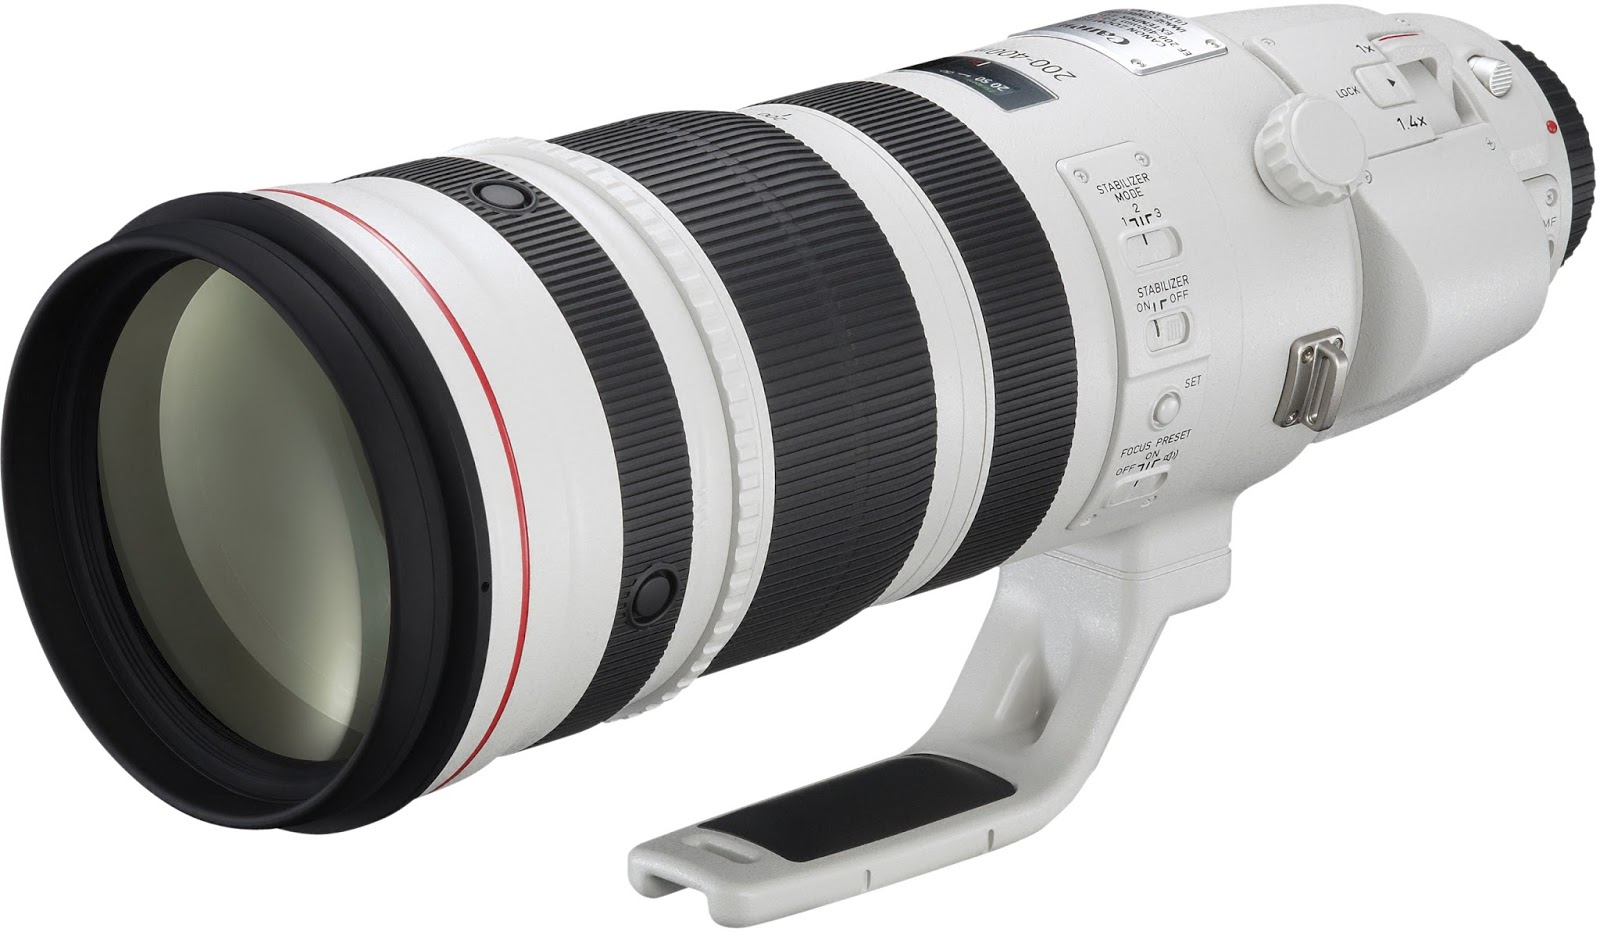 Is Canon Discontinuing Ef Lenses